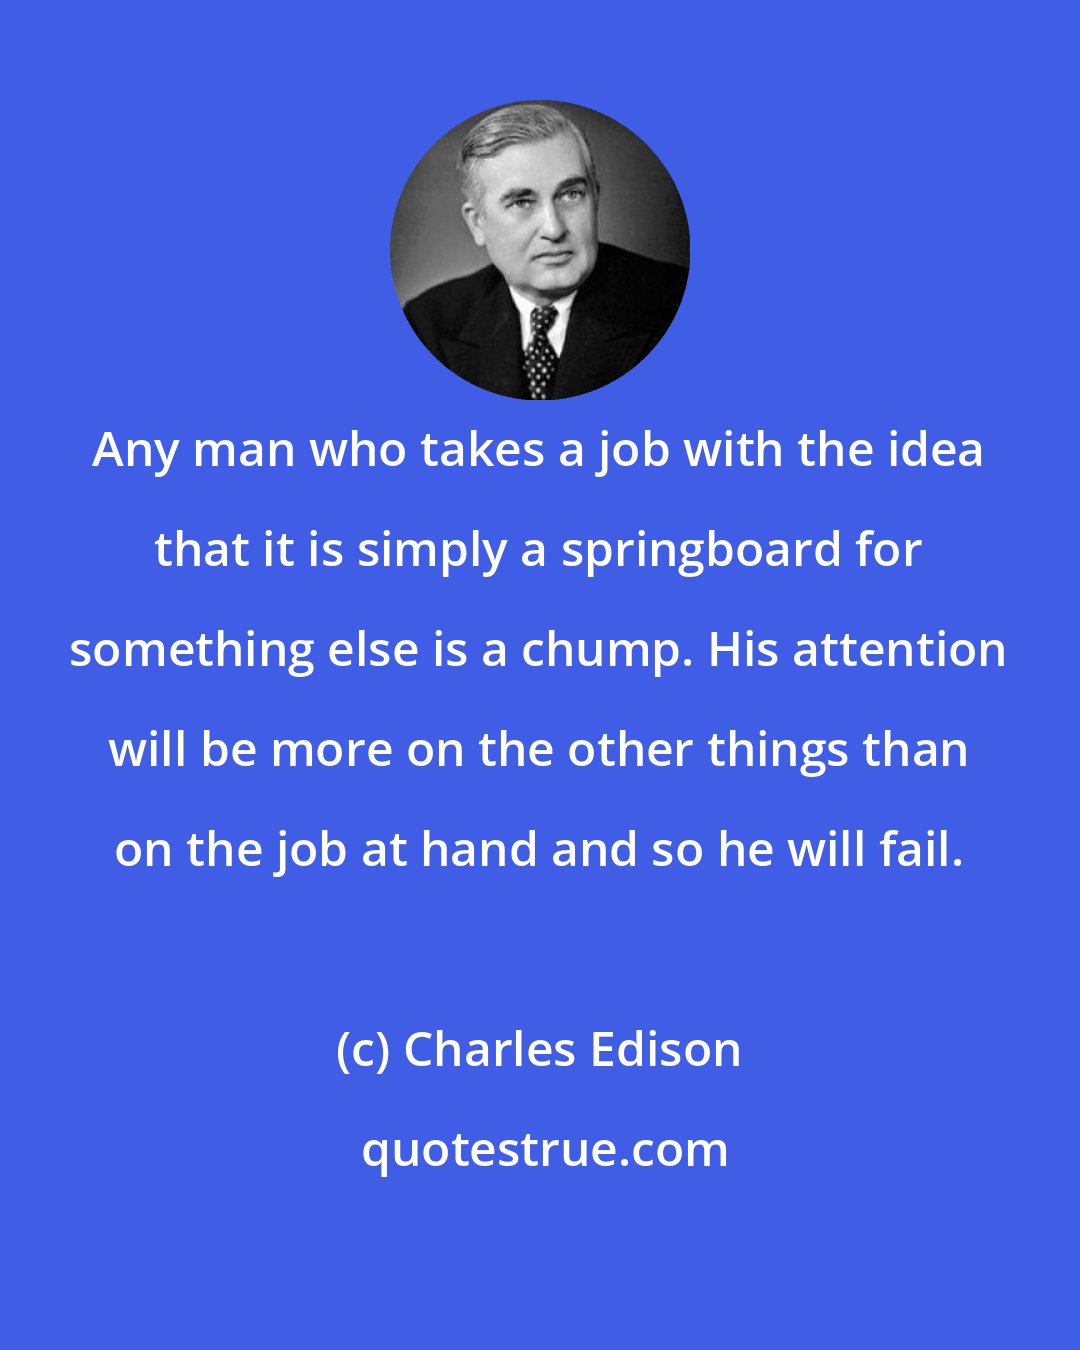 Charles Edison: Any man who takes a job with the idea that it is simply a springboard for something else is a chump. His attention will be more on the other things than on the job at hand and so he will fail.